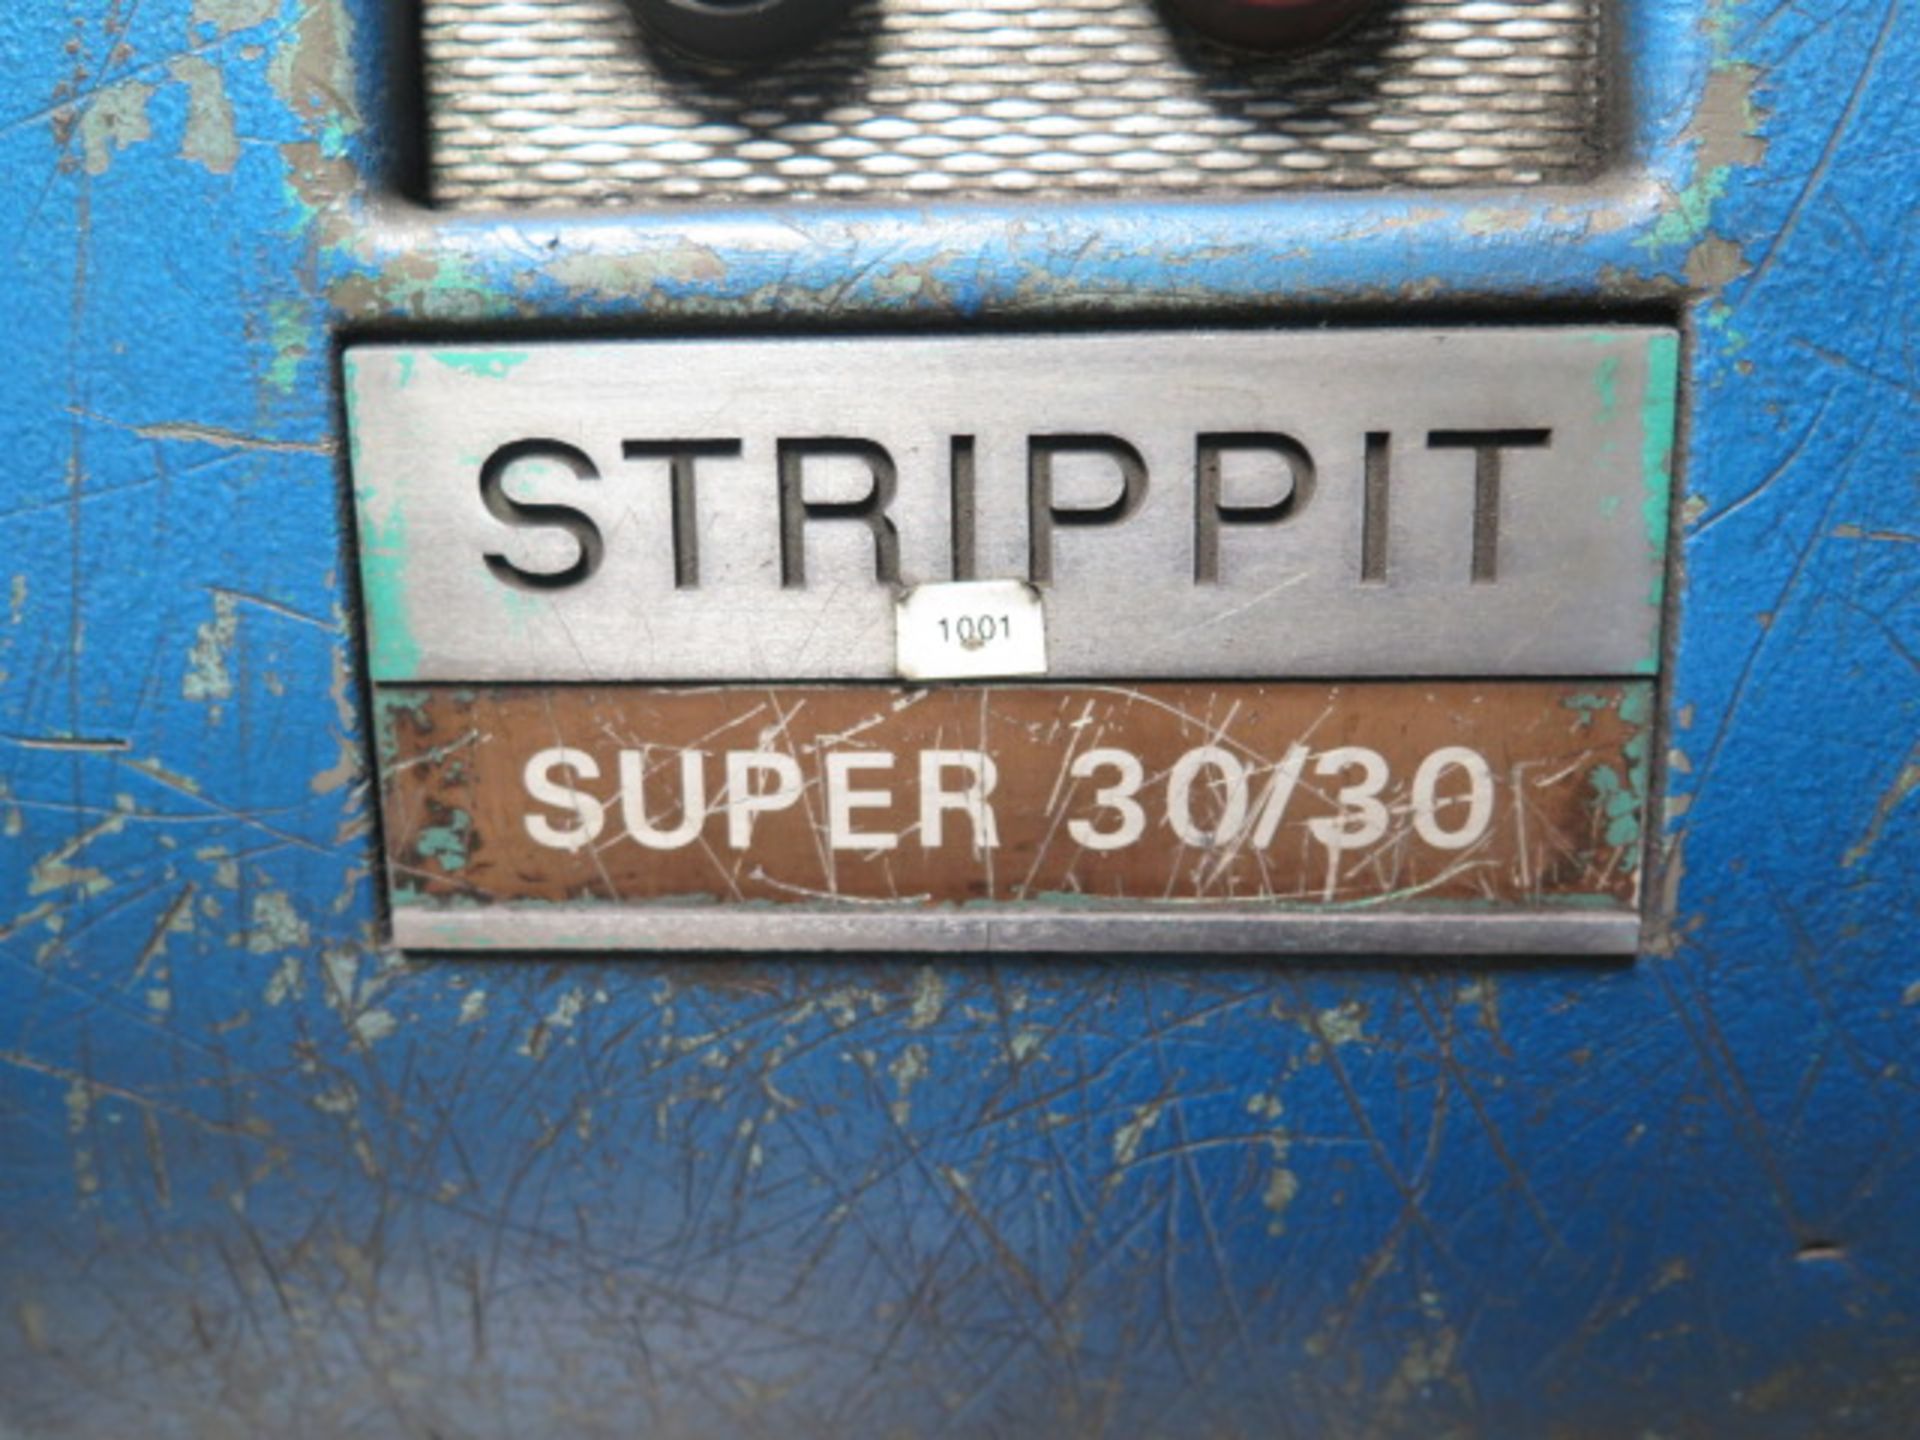 Strippit Super 30/30 Sheet Metal Fabrication Punch Press w/ Fence System (SOLD AS-IS - NO WARRANTY) - Image 4 of 18